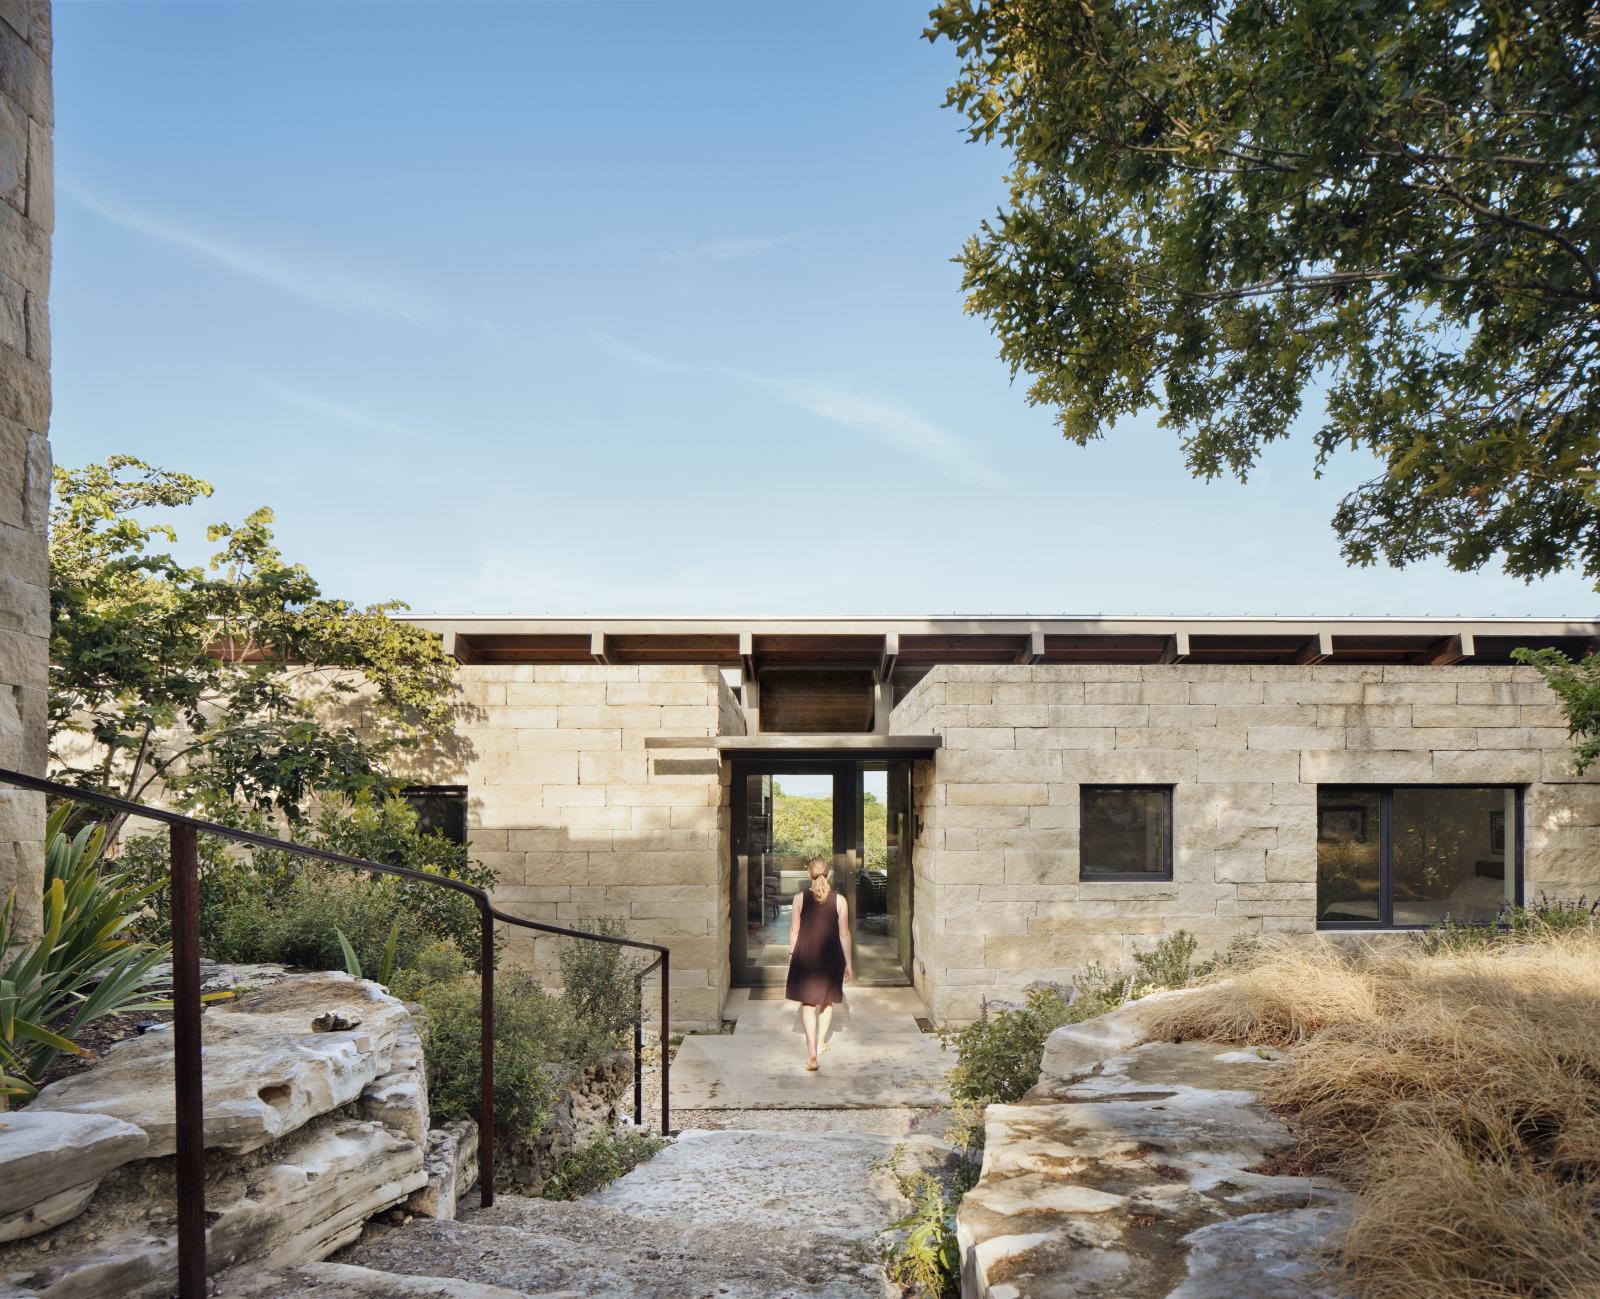 Canyon Preserve stair step down steep, rocky slopes of oaks and indigenous vegetation, creating a secluded and serene setting for this intimate house